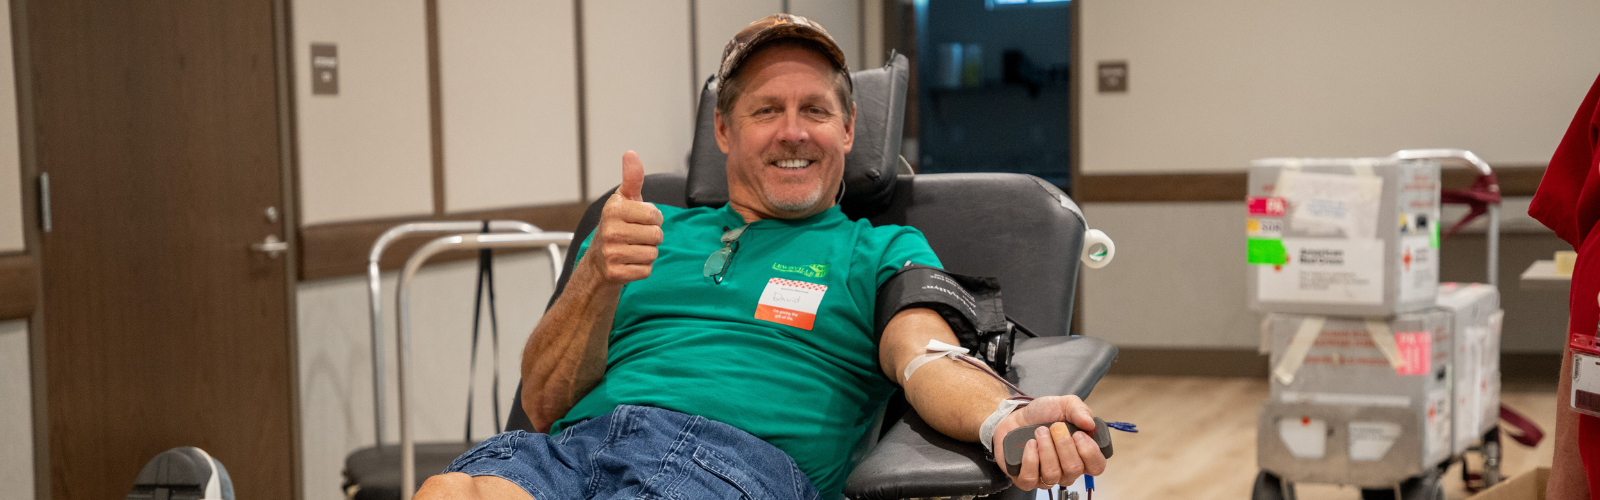 Man gives thumbs up while donating blood